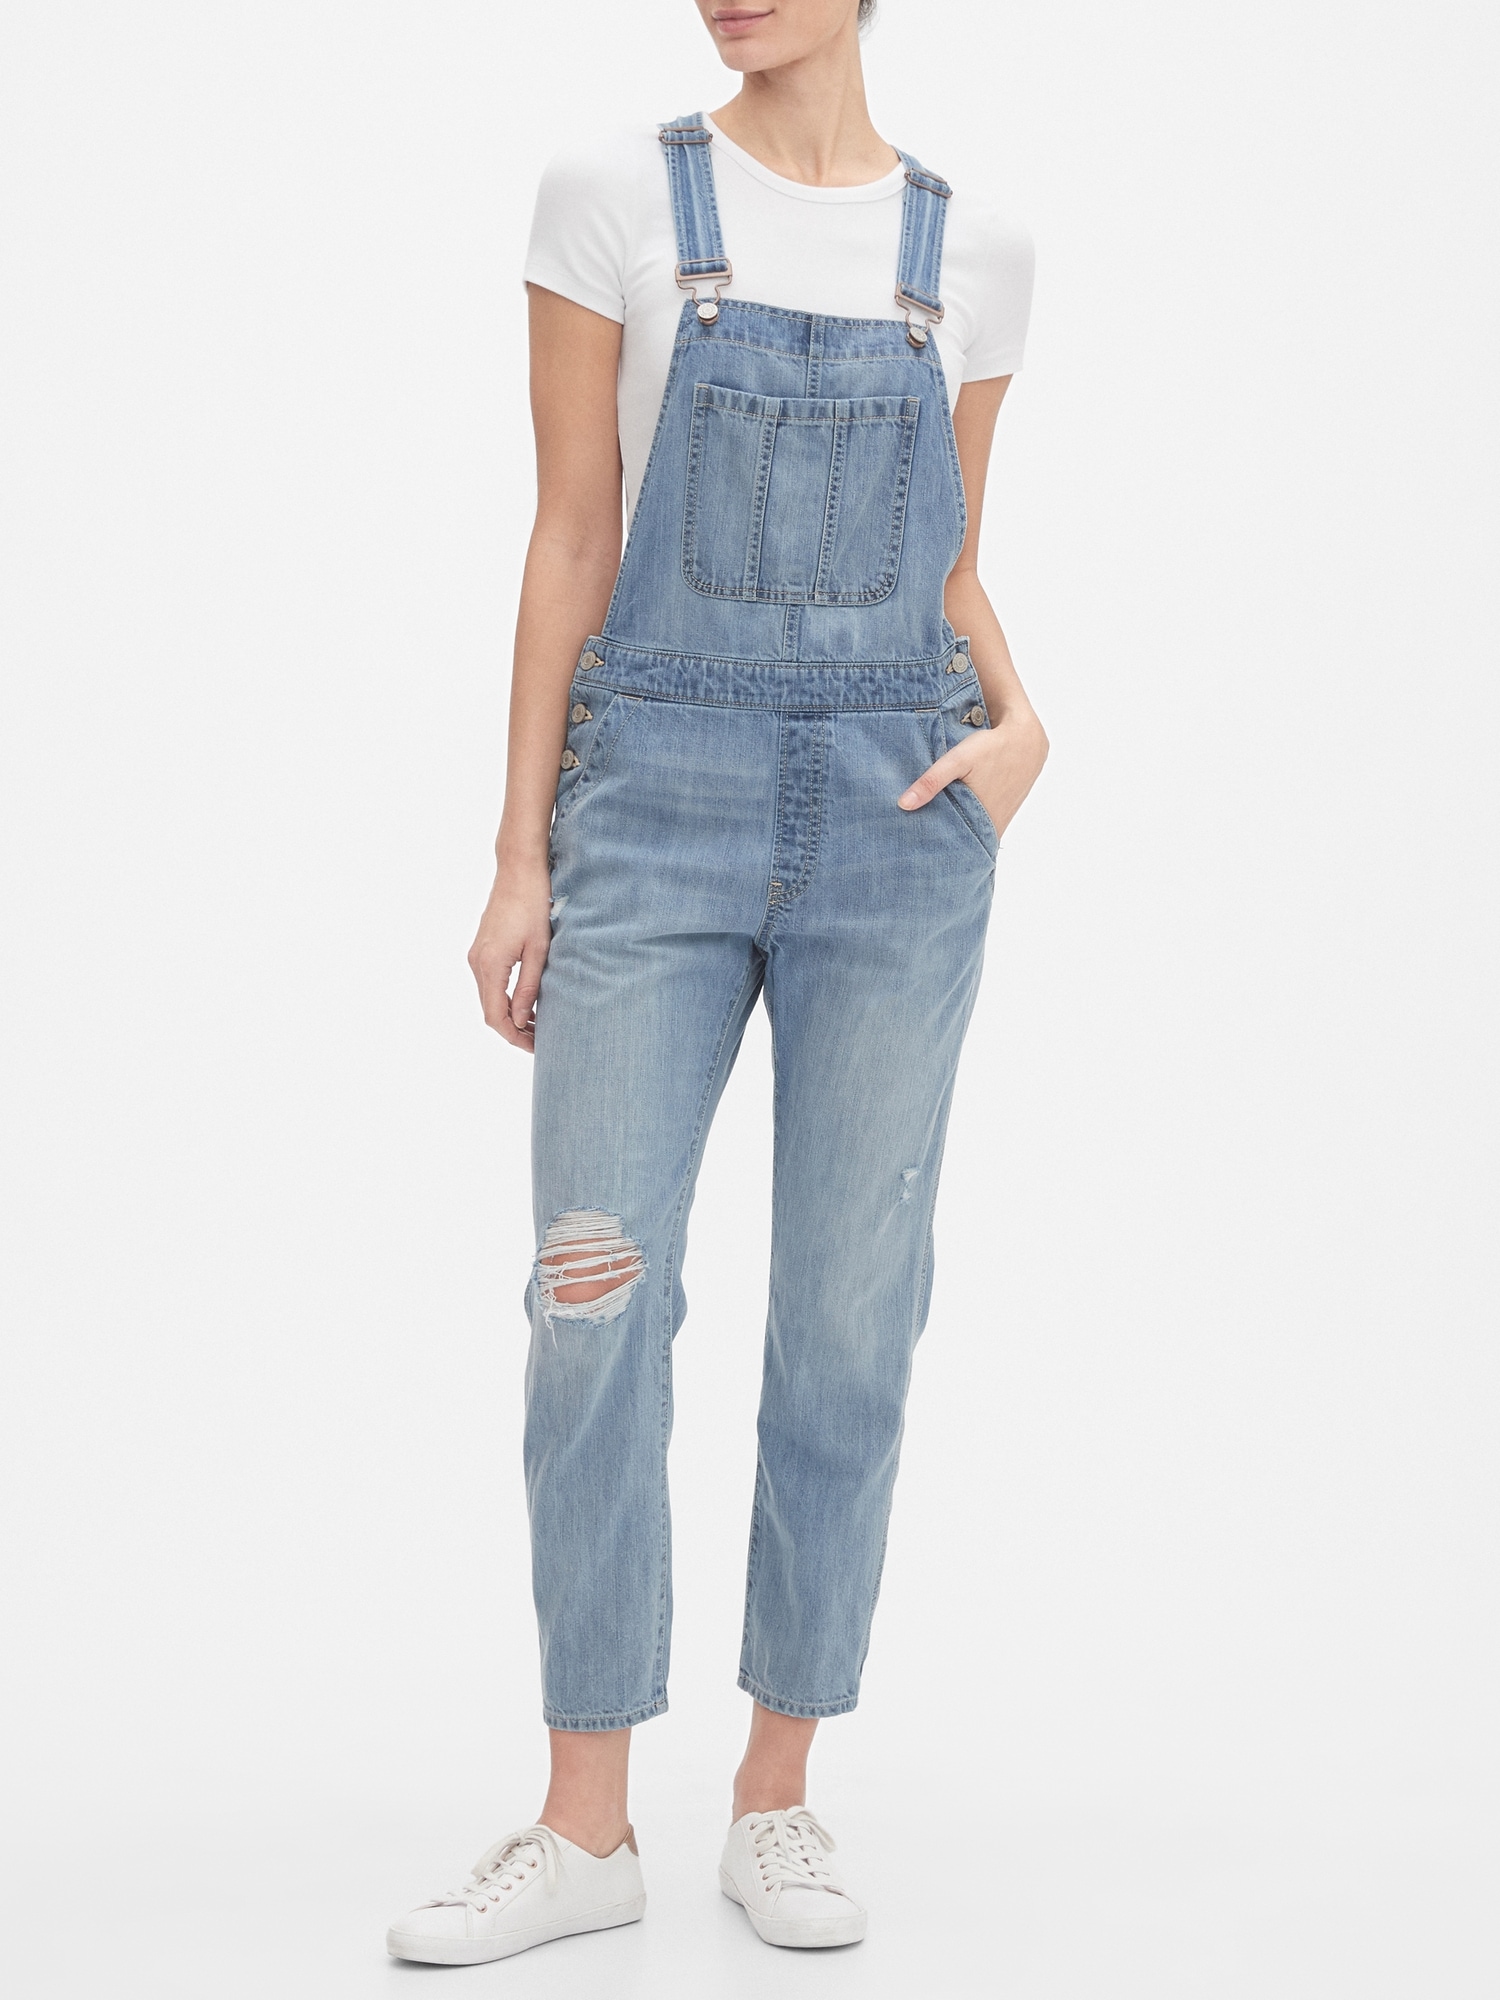 distressed jean overalls